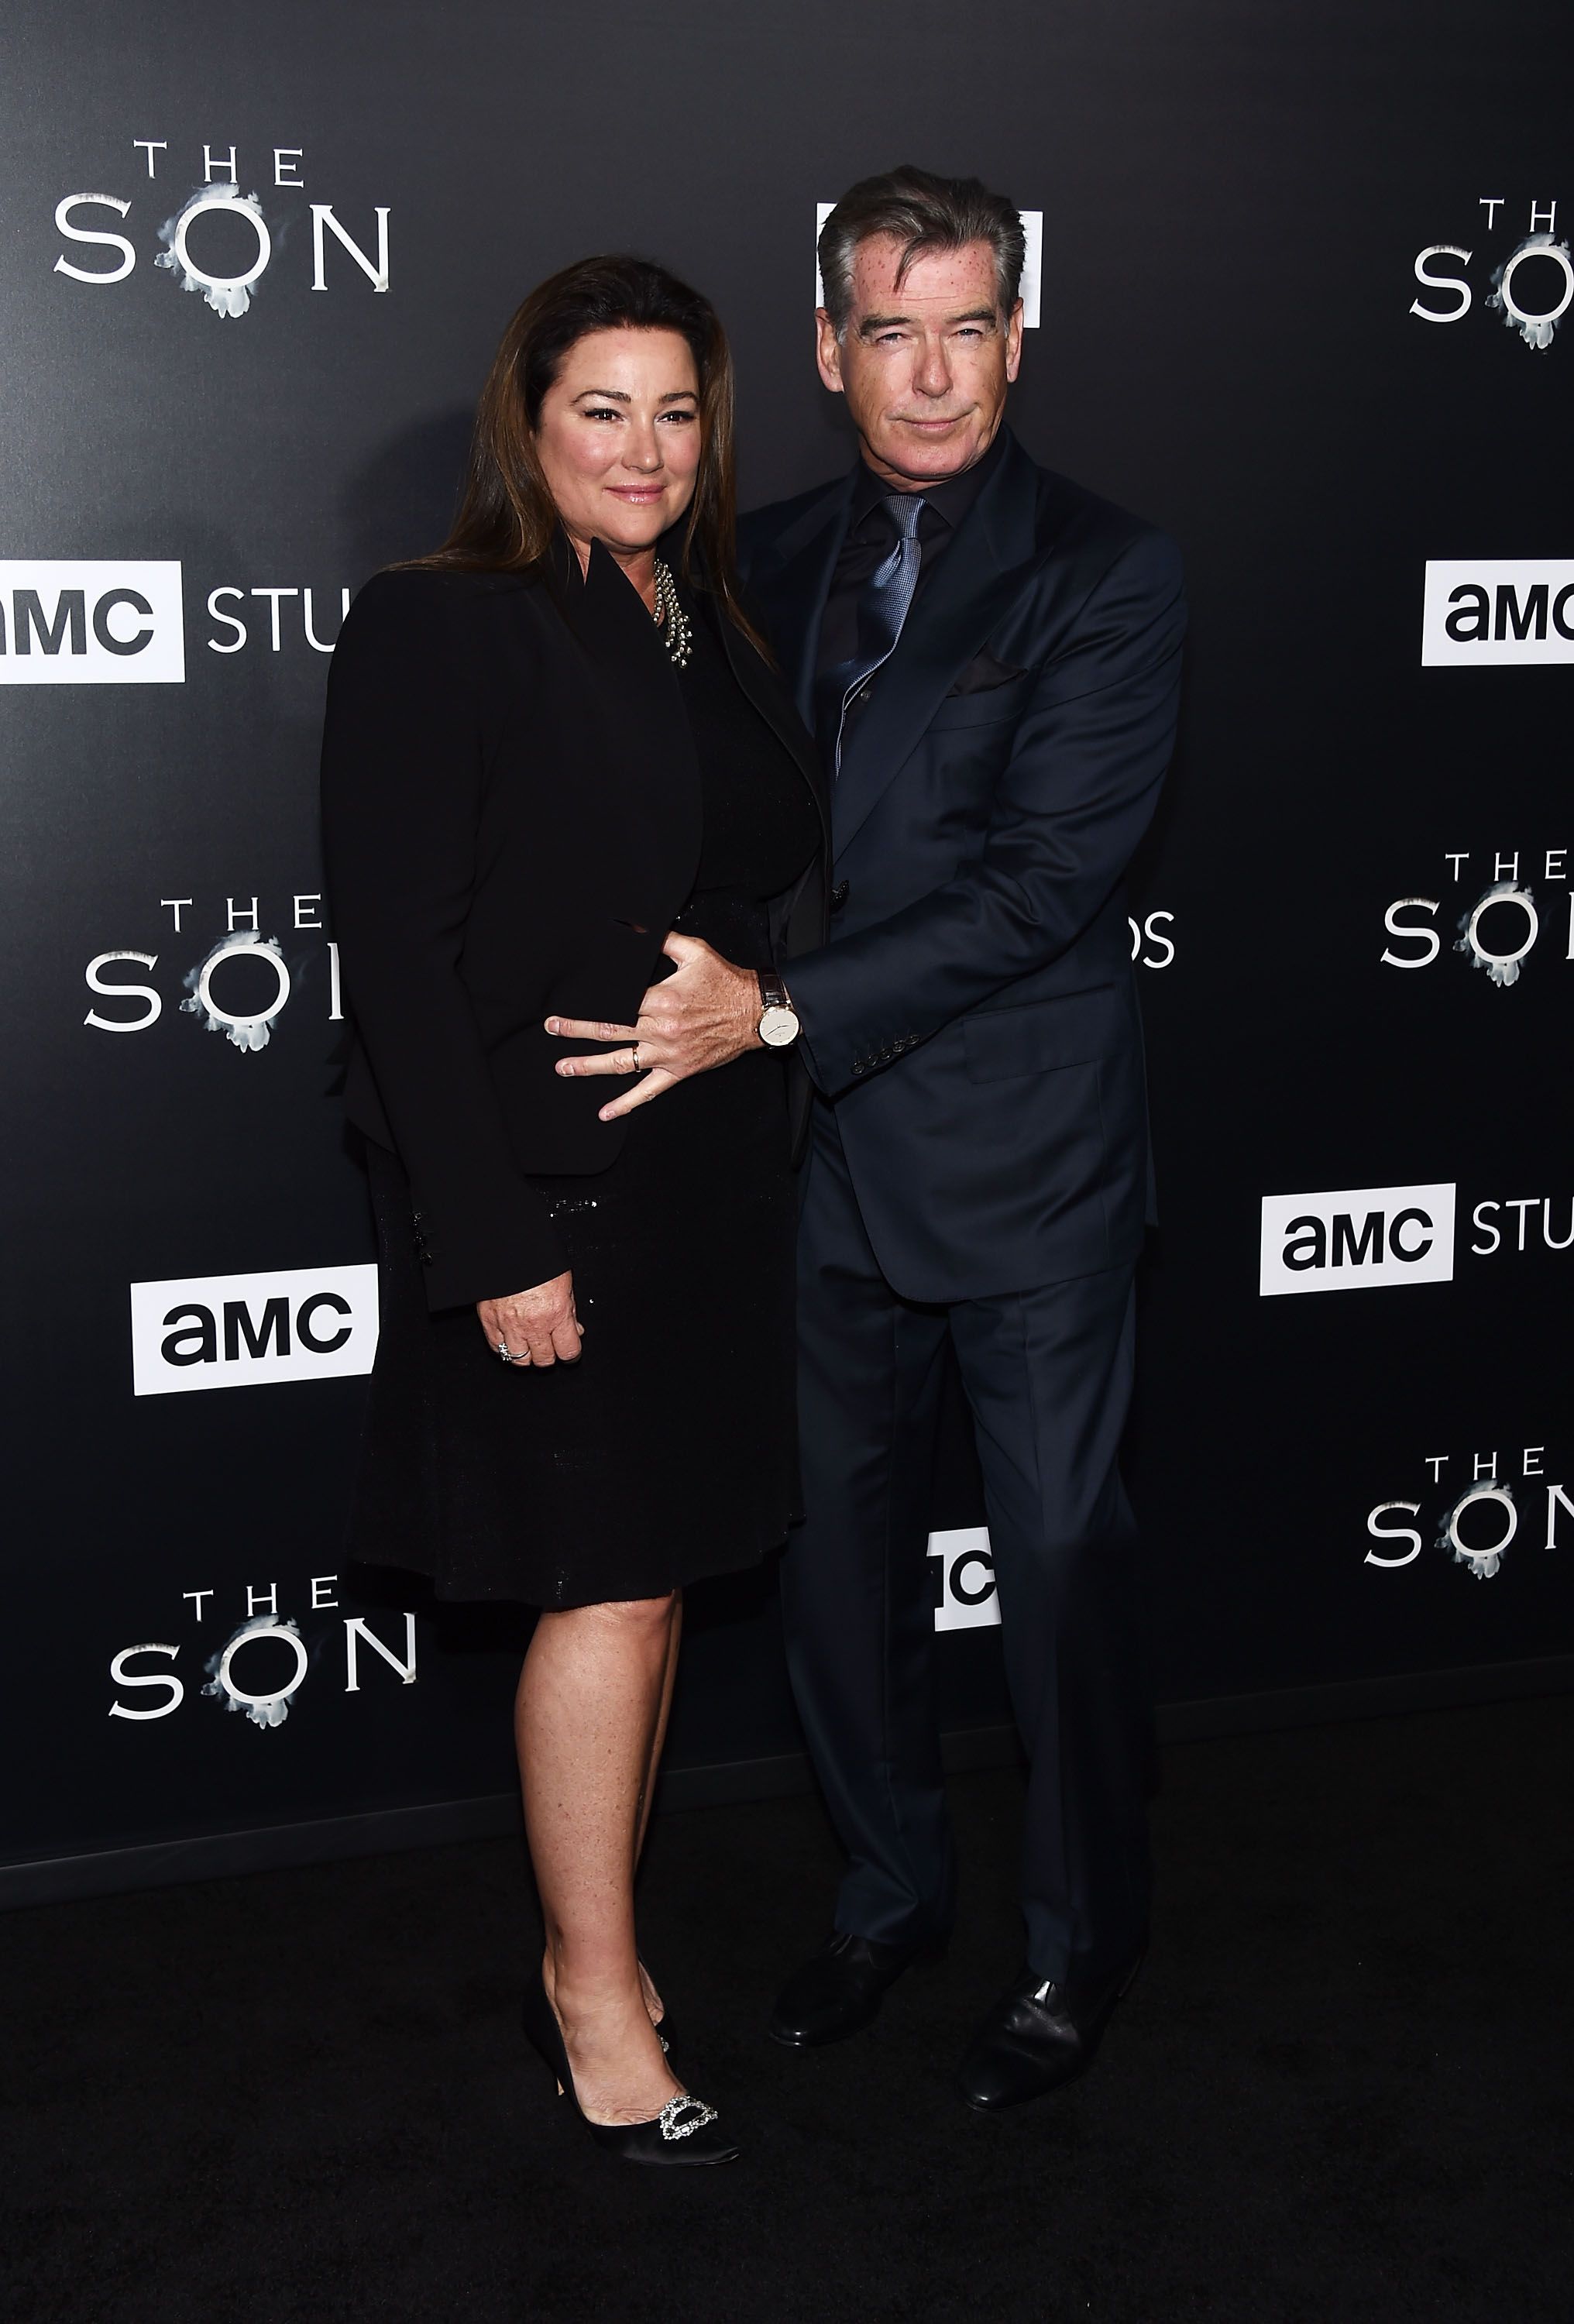 Pierce Brosnan and Keely Shaye Brosnan during the premiere of AMC's "The Son" at ArcLight Hollywood on April 3, 2017, in Hollywood, California. | Source: Getty Images